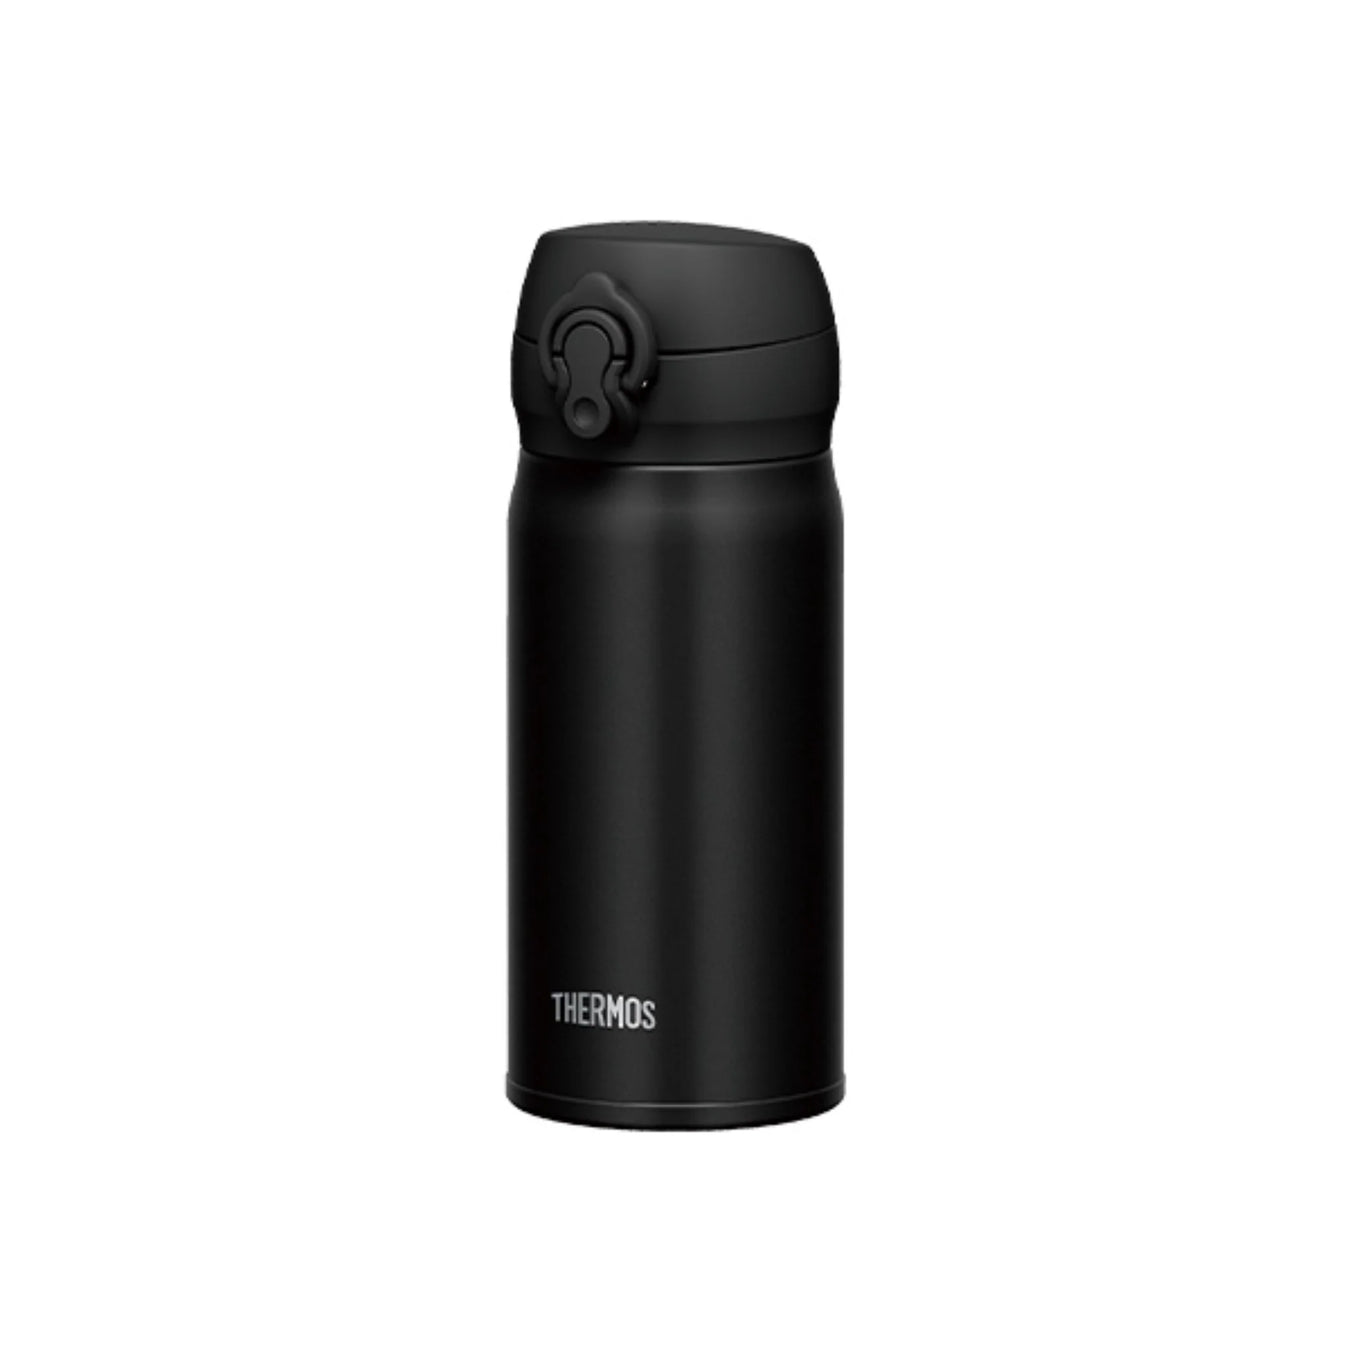 Thermos' Insulated Tumblers